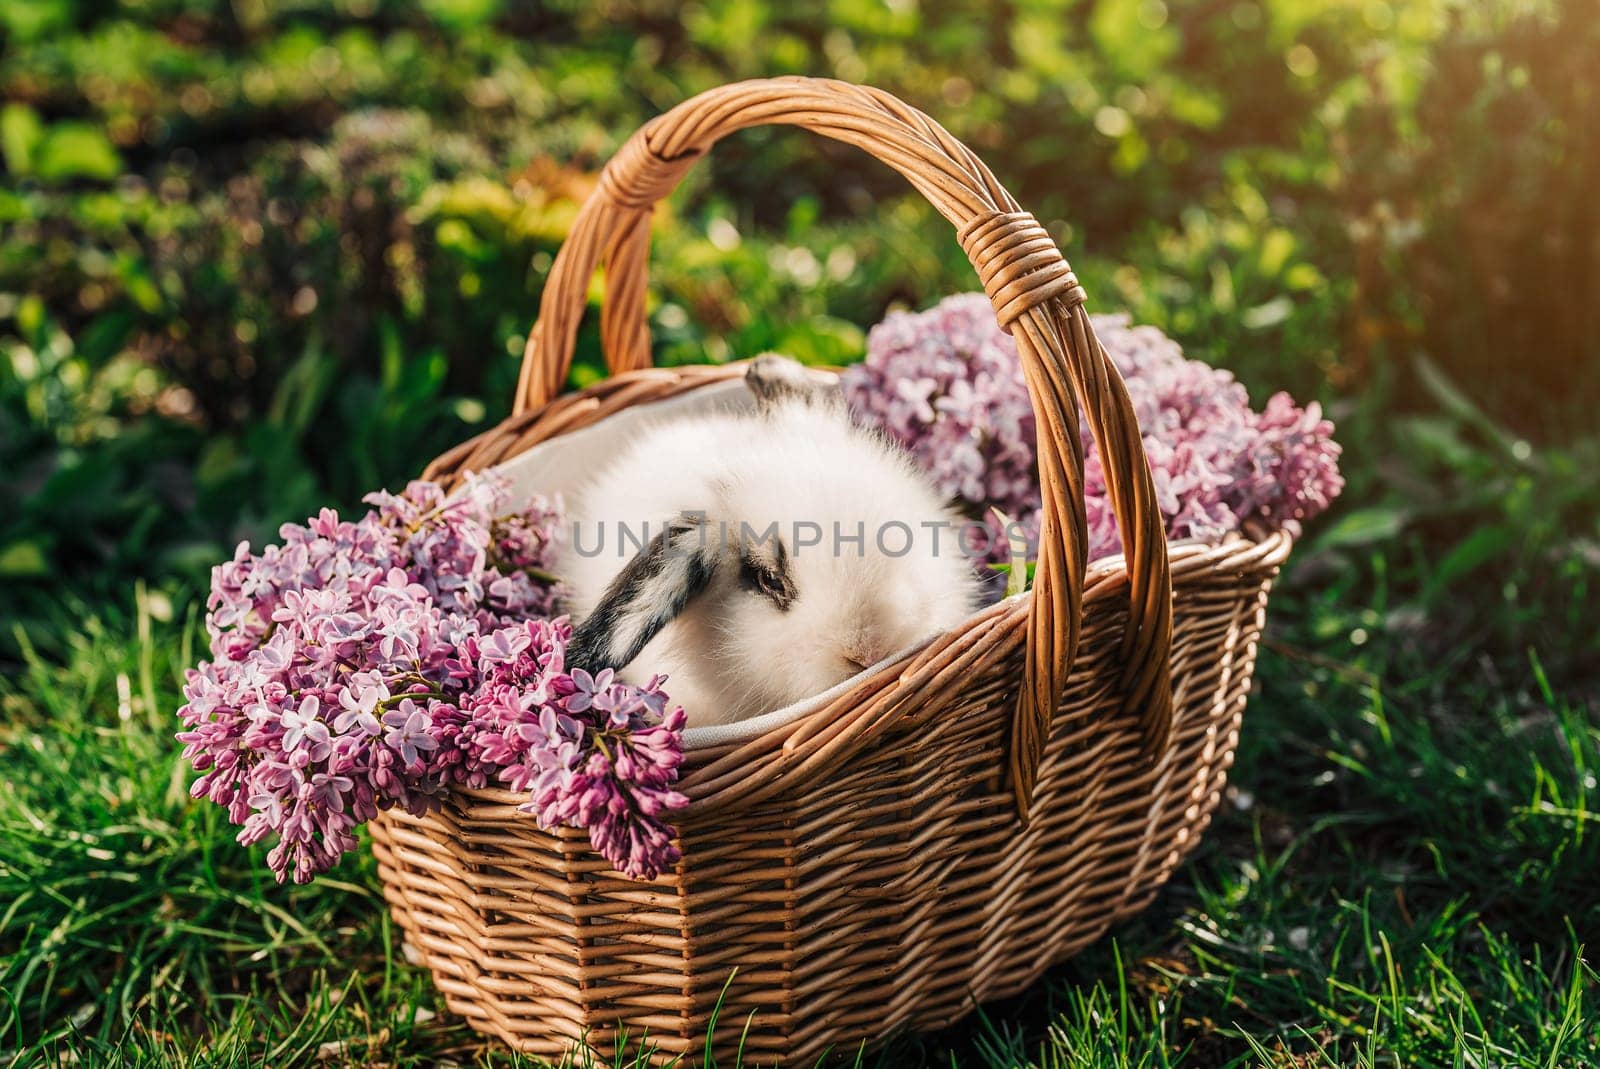 Cute little baby rabbit in wicker basket on nature background. Easter bunny symbol with lilac flowers bouquet. by kristina_kokhanova